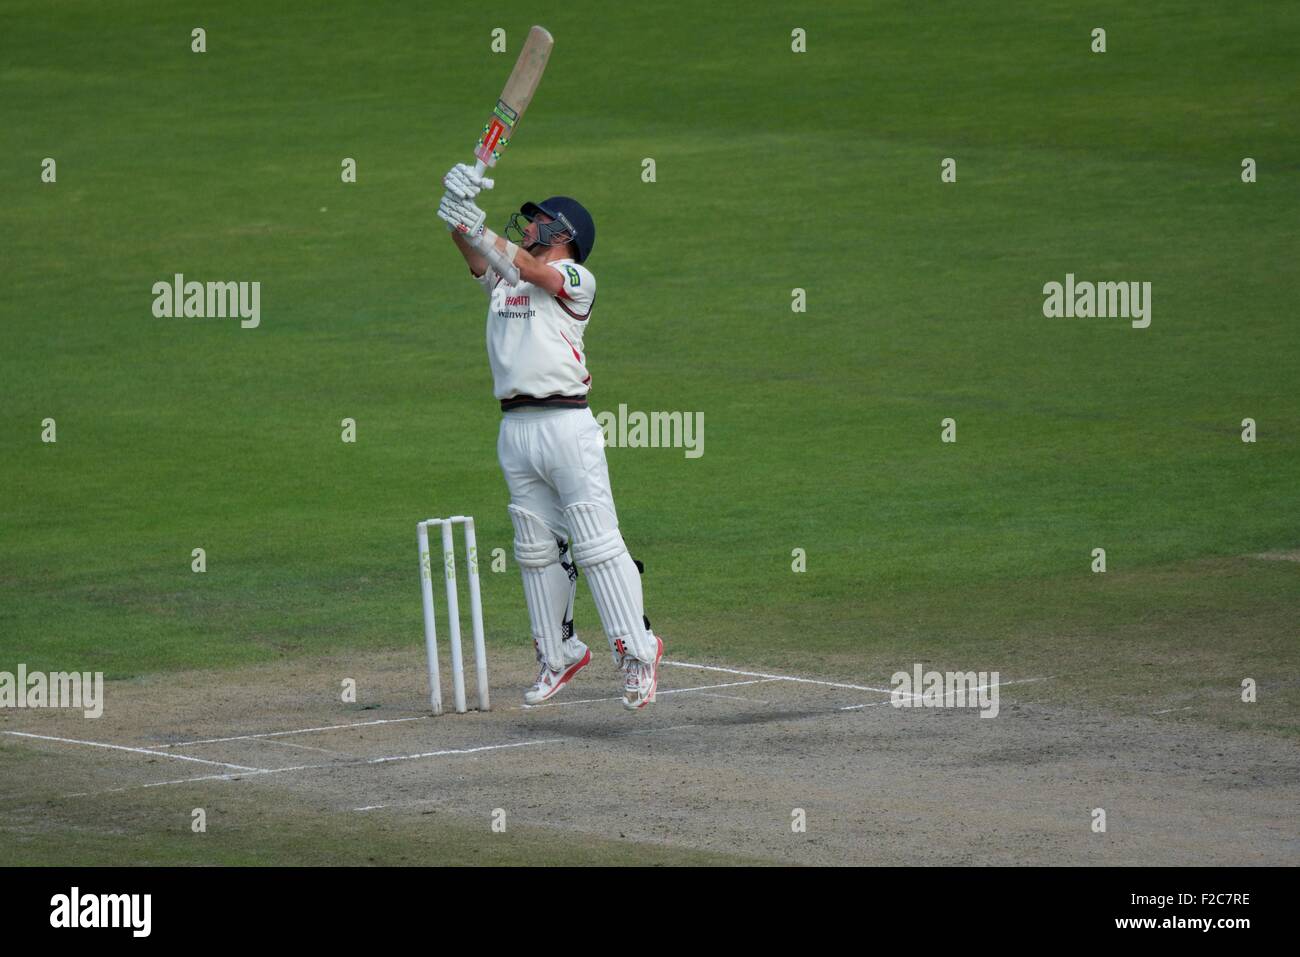 Manchester, UK  16th September 2015  Simon Kerrigan Lancashire) stretches to reach a bouncer on the third day of  their top of the table match against Surreyat Emirates Old Trafford. County Cricket  Lancashire v Surrey   Manchester, UK Credit:  John Fryer/Alamy Live News Stock Photo